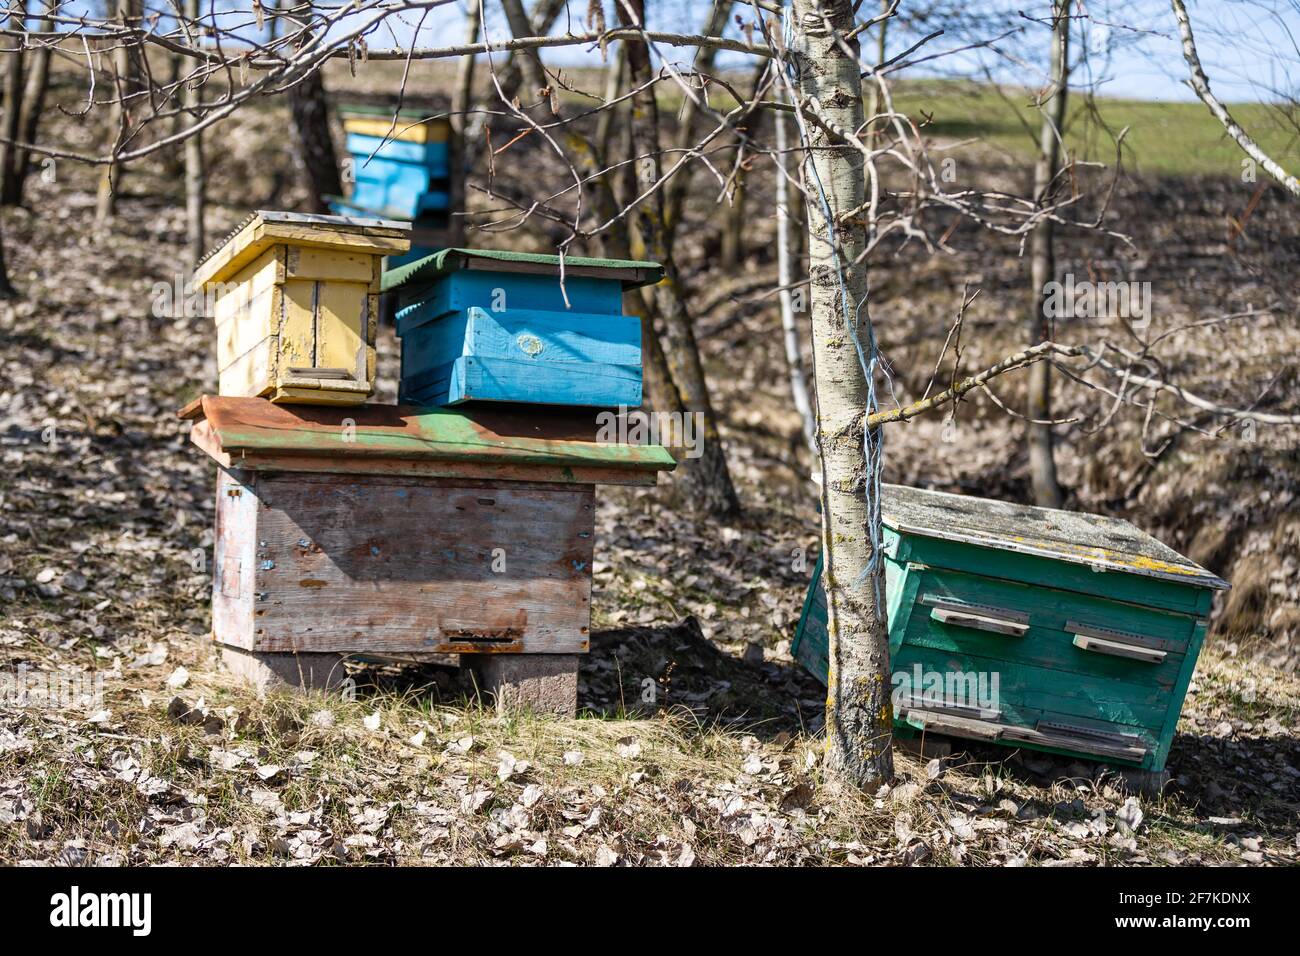 Beehives in a field with trees, hives. Stock Photo